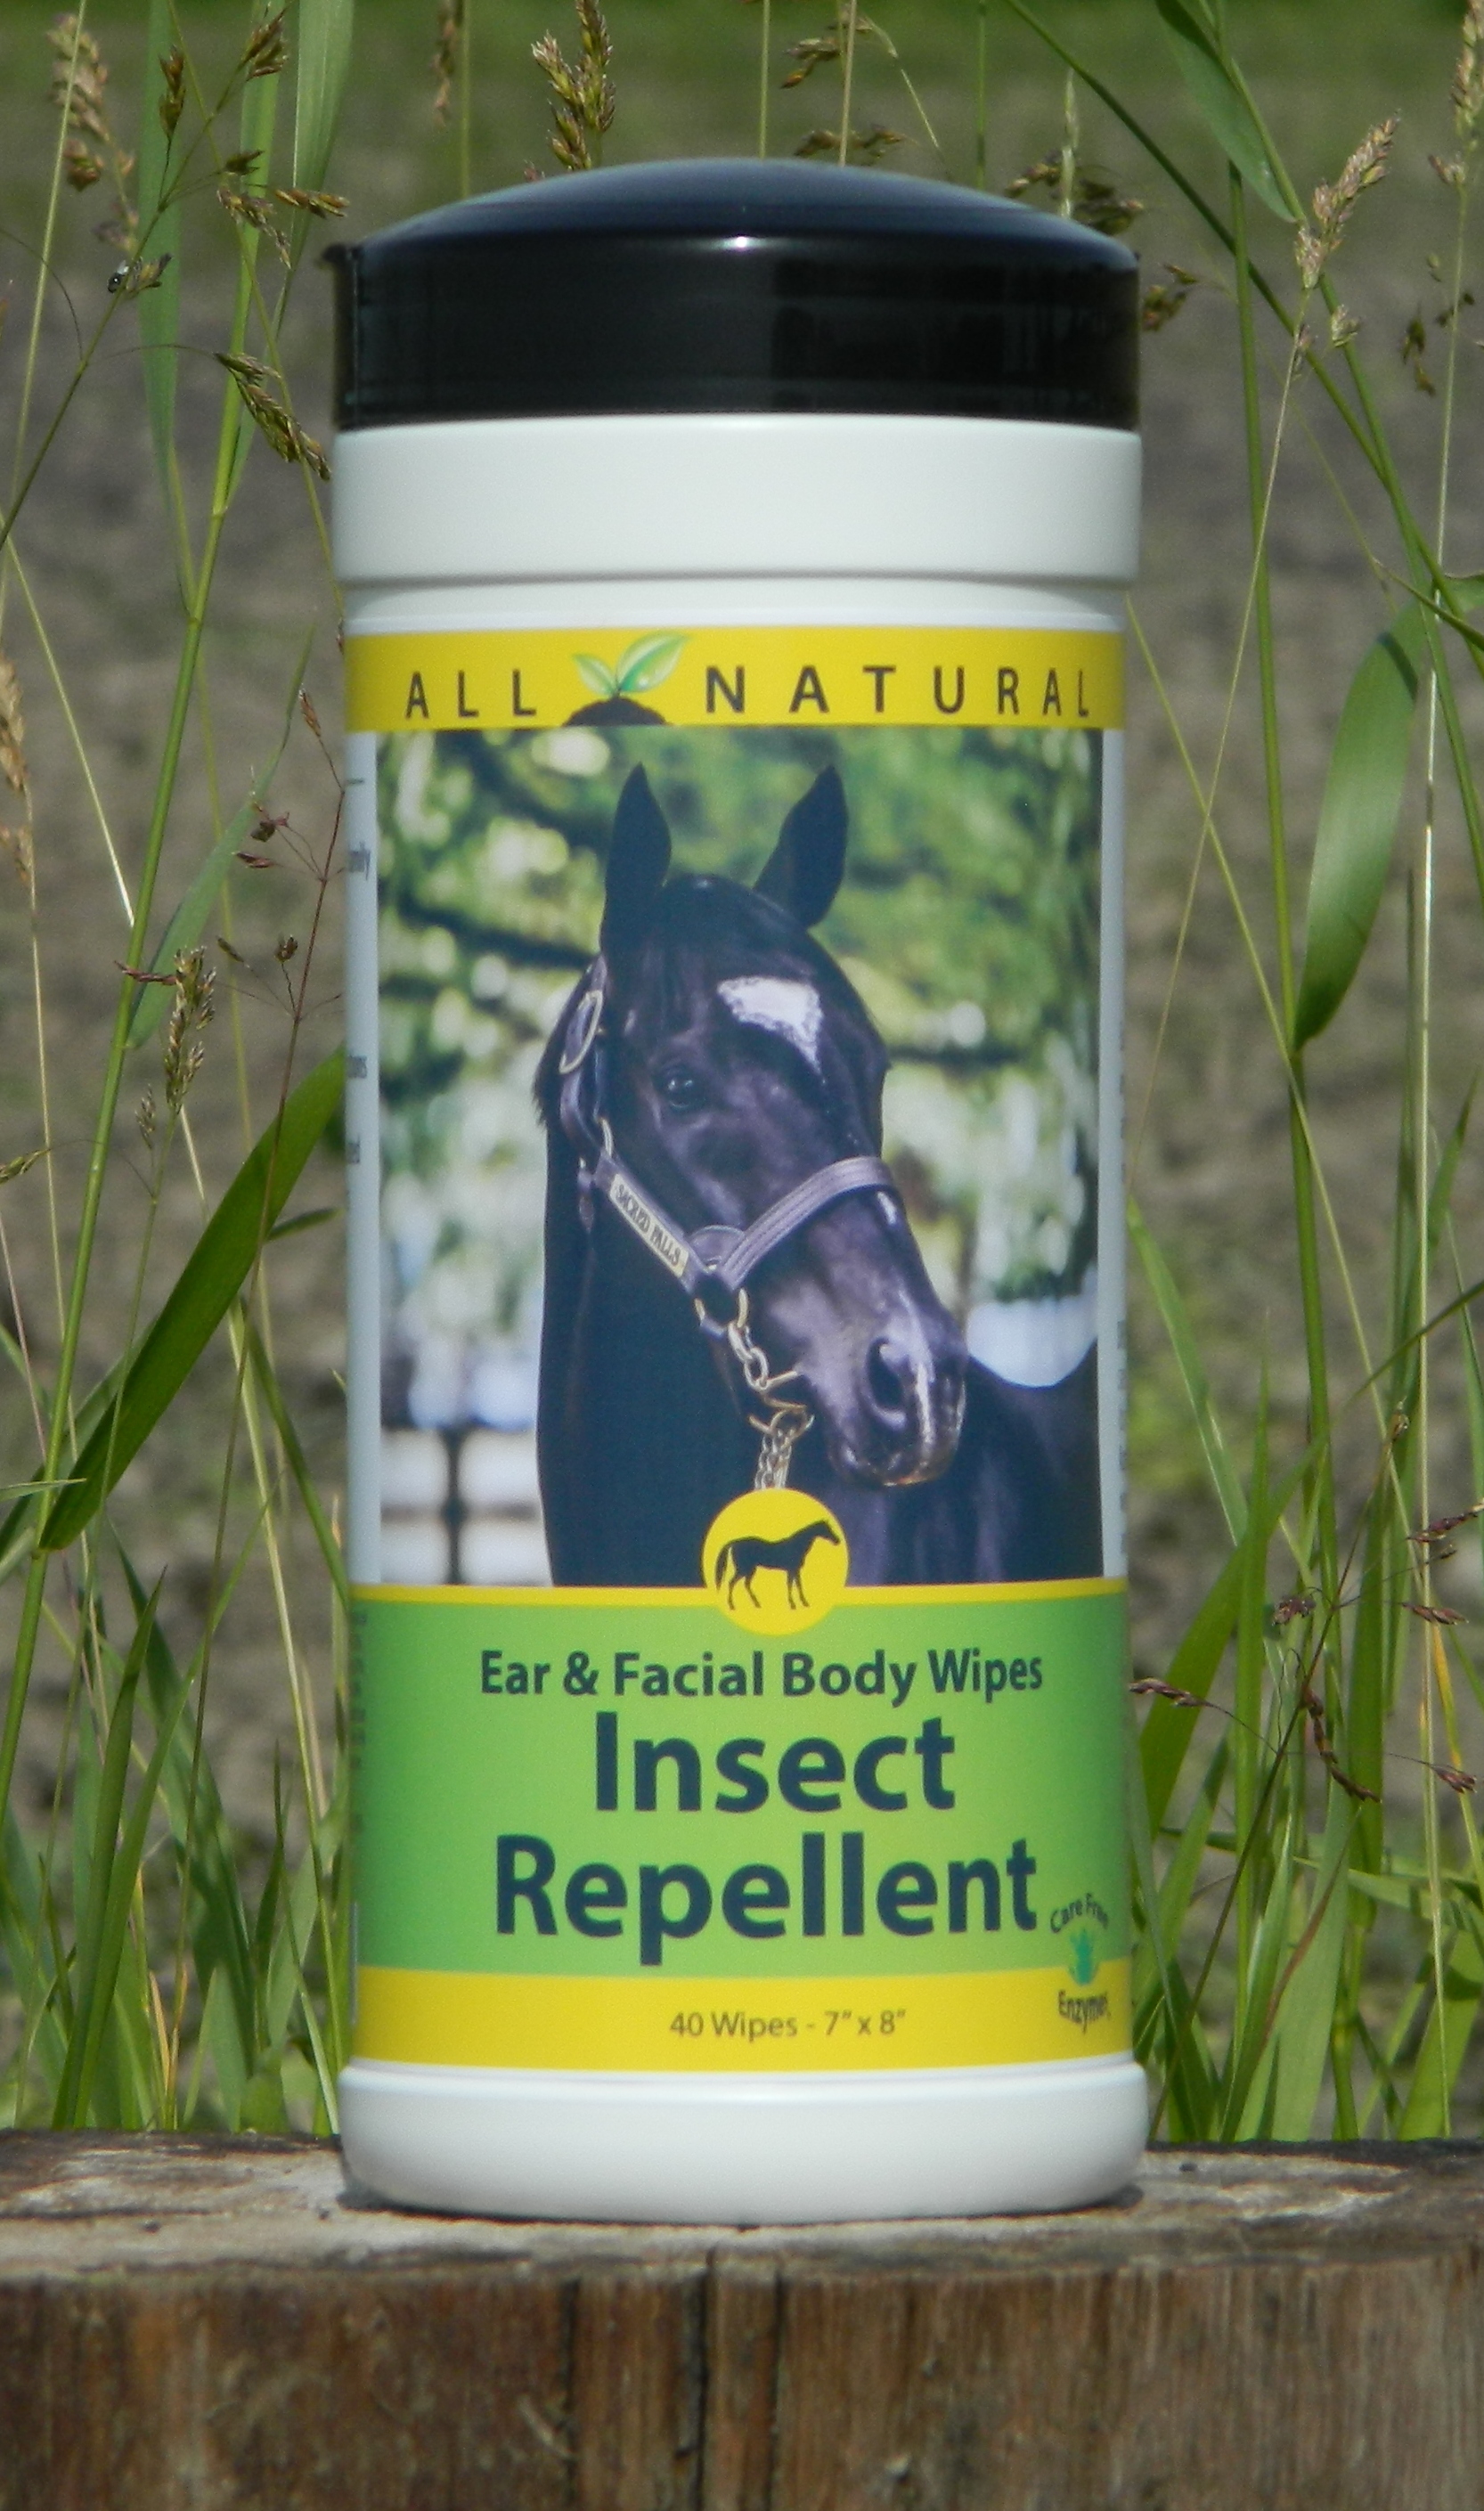 Insect Repellent for horses